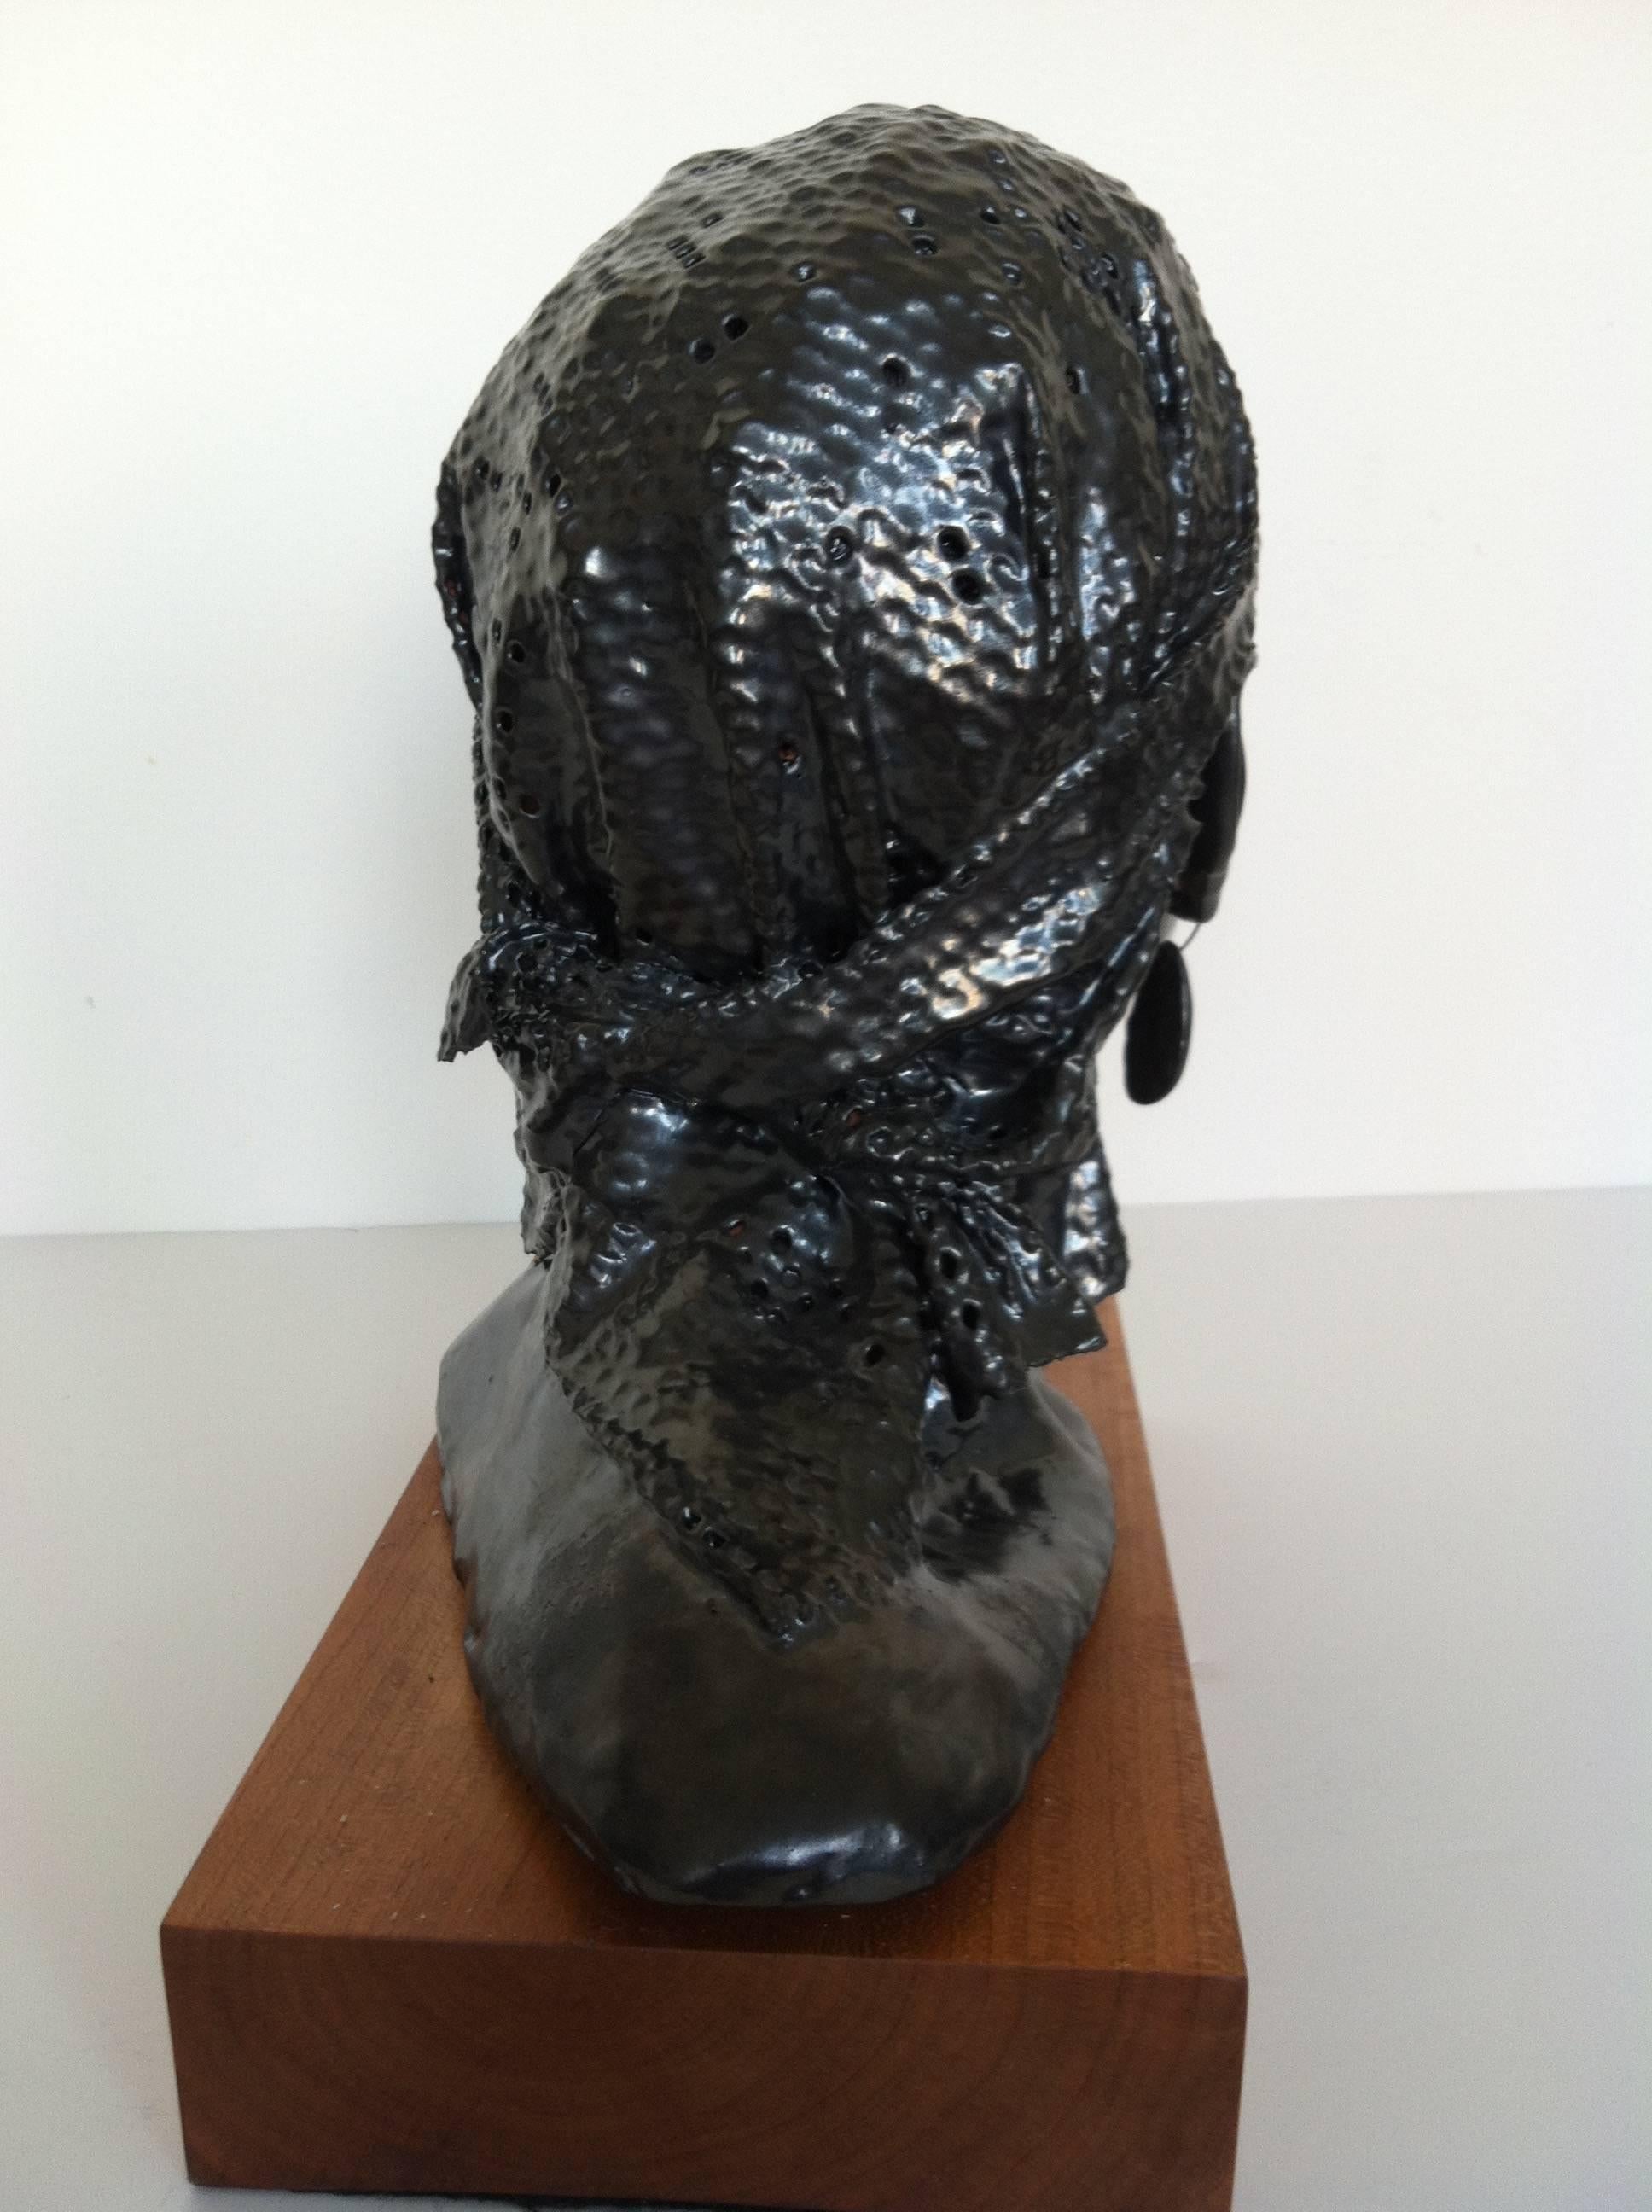 This is a life size-head of the iconic singer Nina Simone, sculpted in ceramic and covered in a taupe/silver metal glaze. The bust stands on a pedestal of cherry.
Thick tear drop earrings hang from her ear lobes.The head is covered by an